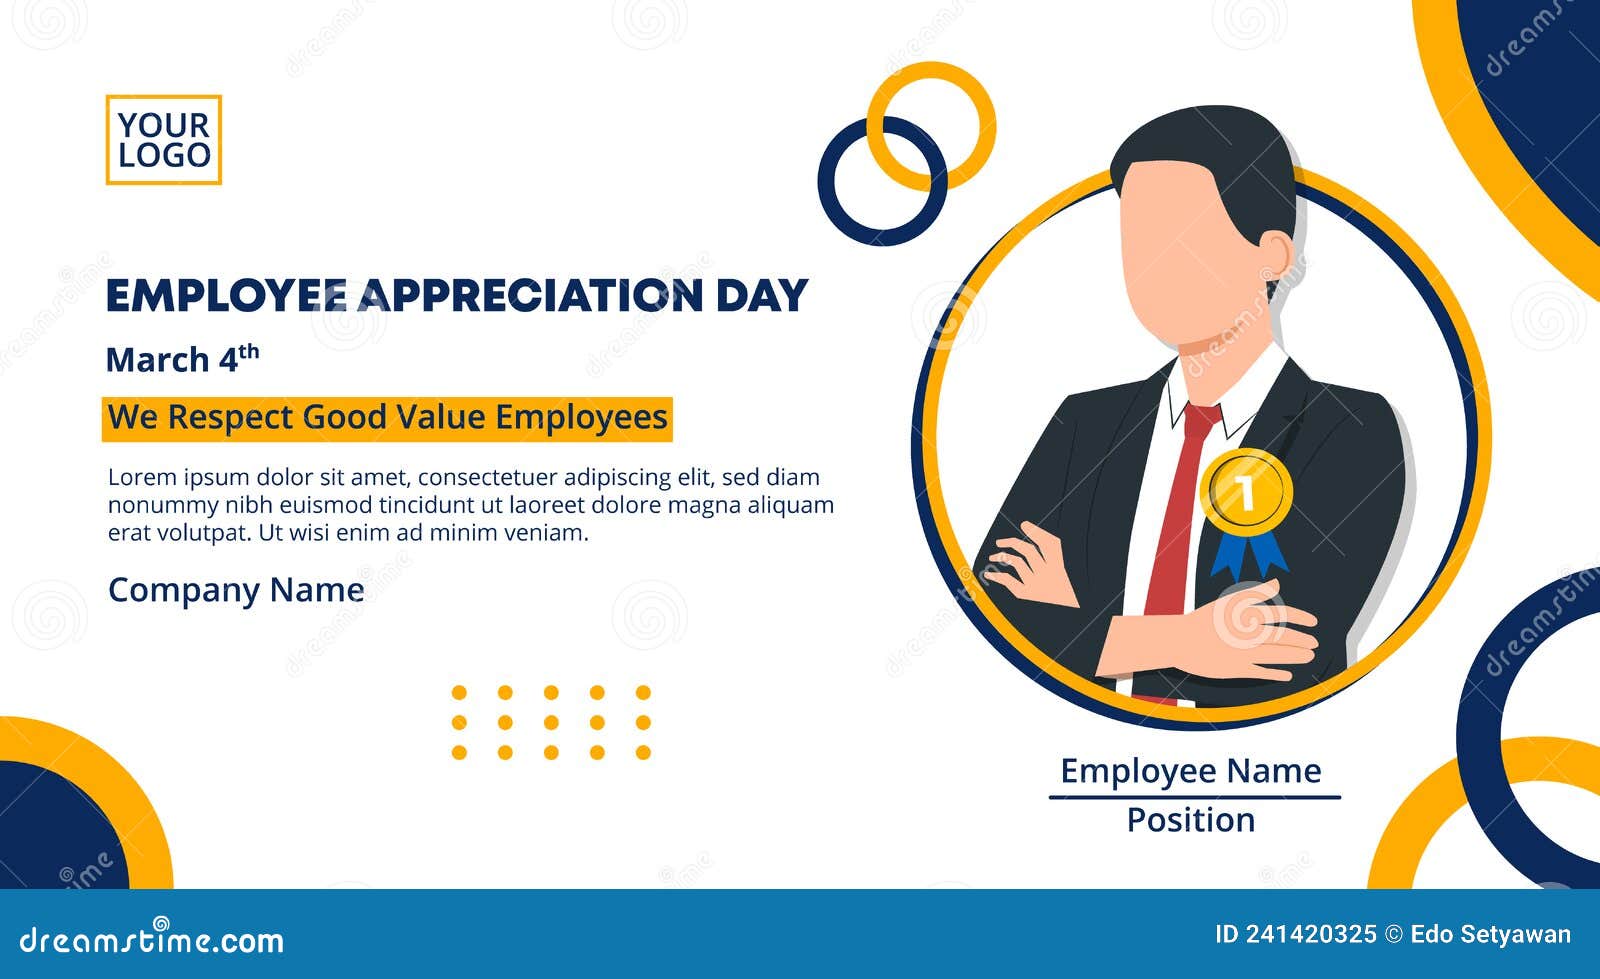 employee appreciation day banner  with an employee of the year winner